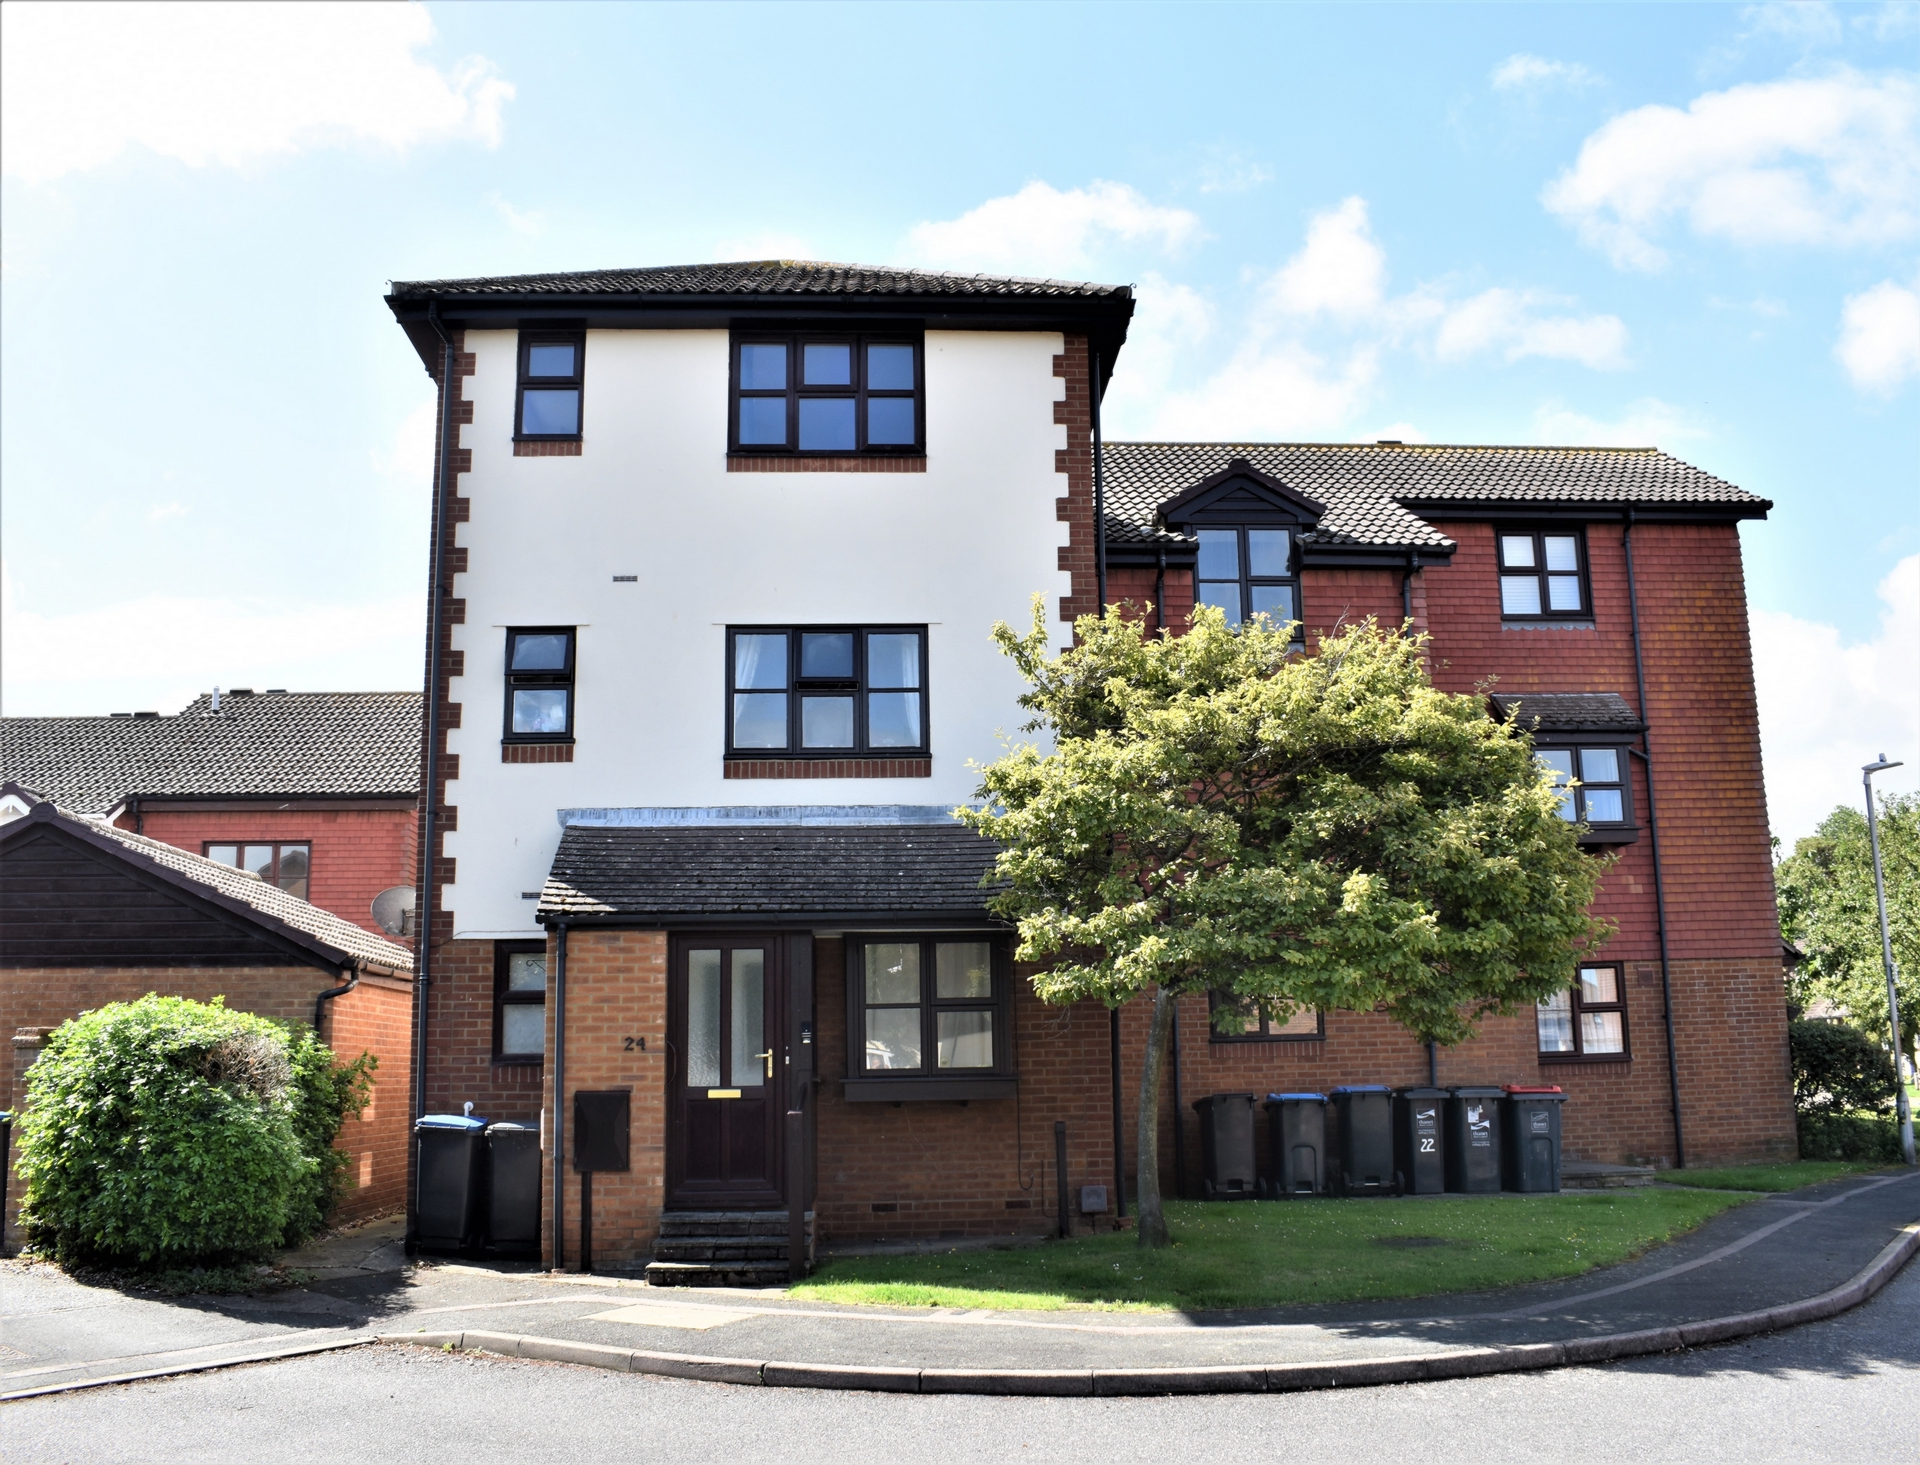 Henderson Setterfield is thrilled to offer this newly redecorated 3rd floor flat complete with newly fitted carpets throughout, this is a large well presented one bedroom flat, the bathroom has a shower over the bath, the kitchen has fitted white wall and base units with integrated hob, oven and ext